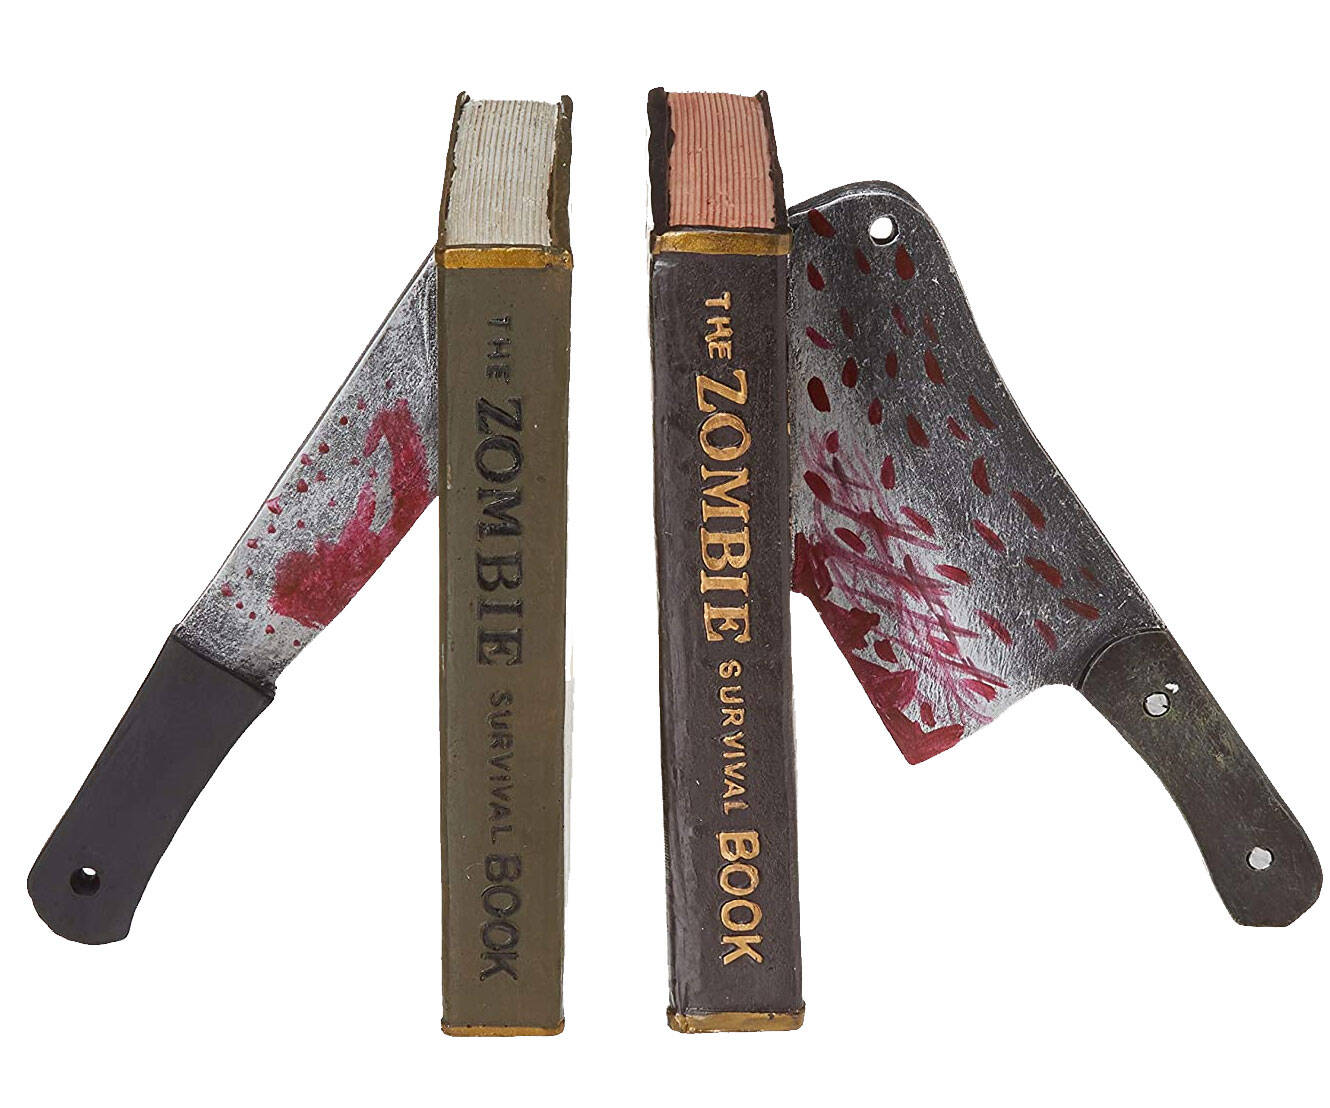 Bloody Cleaver Bookends - //coolthings.us